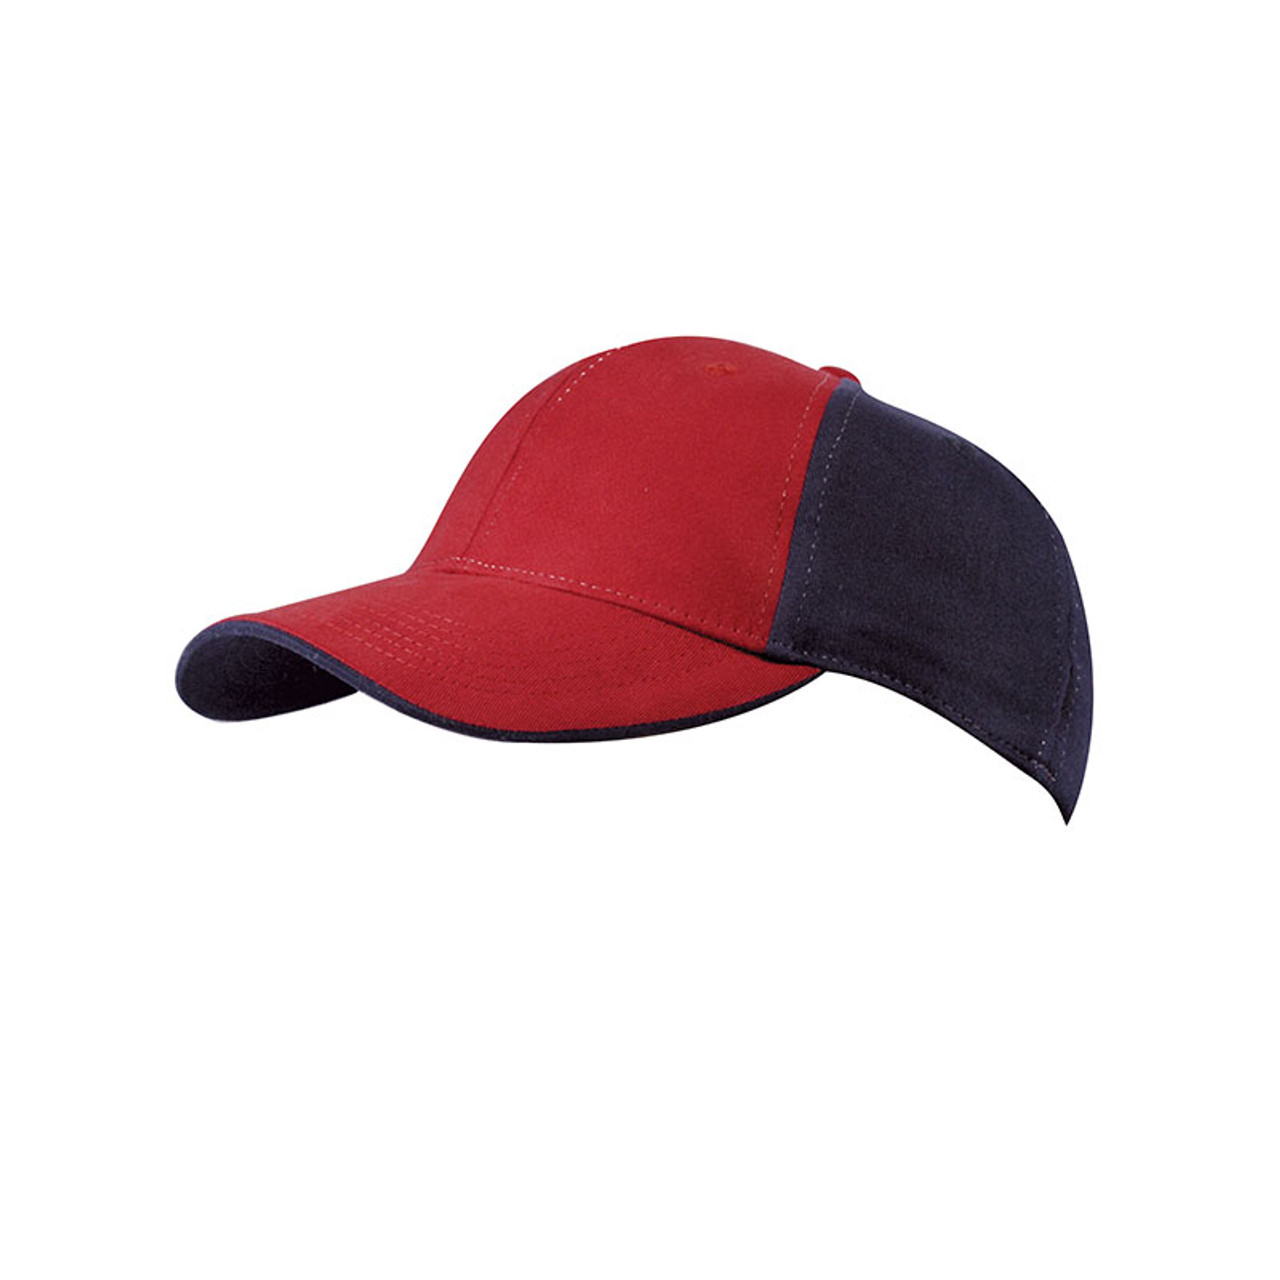 KNP CS6220 Brushed Cotton Twill Stretch Two-Tone Fitted Cap - Red/ Black - L/XL-58cm